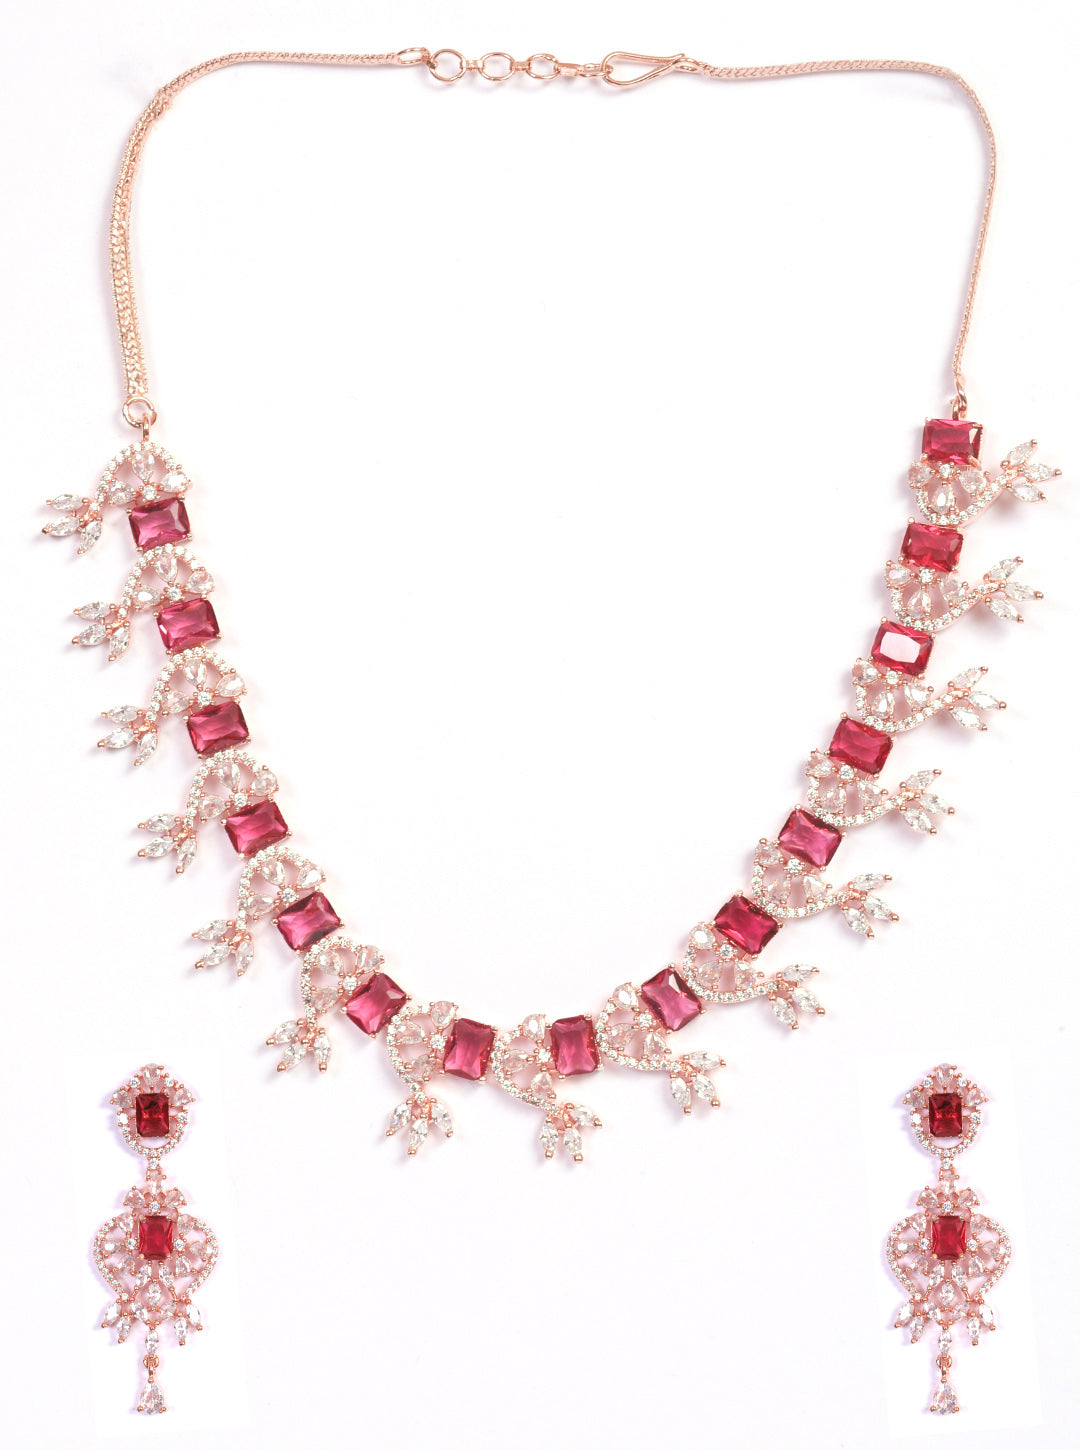 Premium Rose Gold Plated with sparkling Red White CZ stones designer Necklace Set 8934N